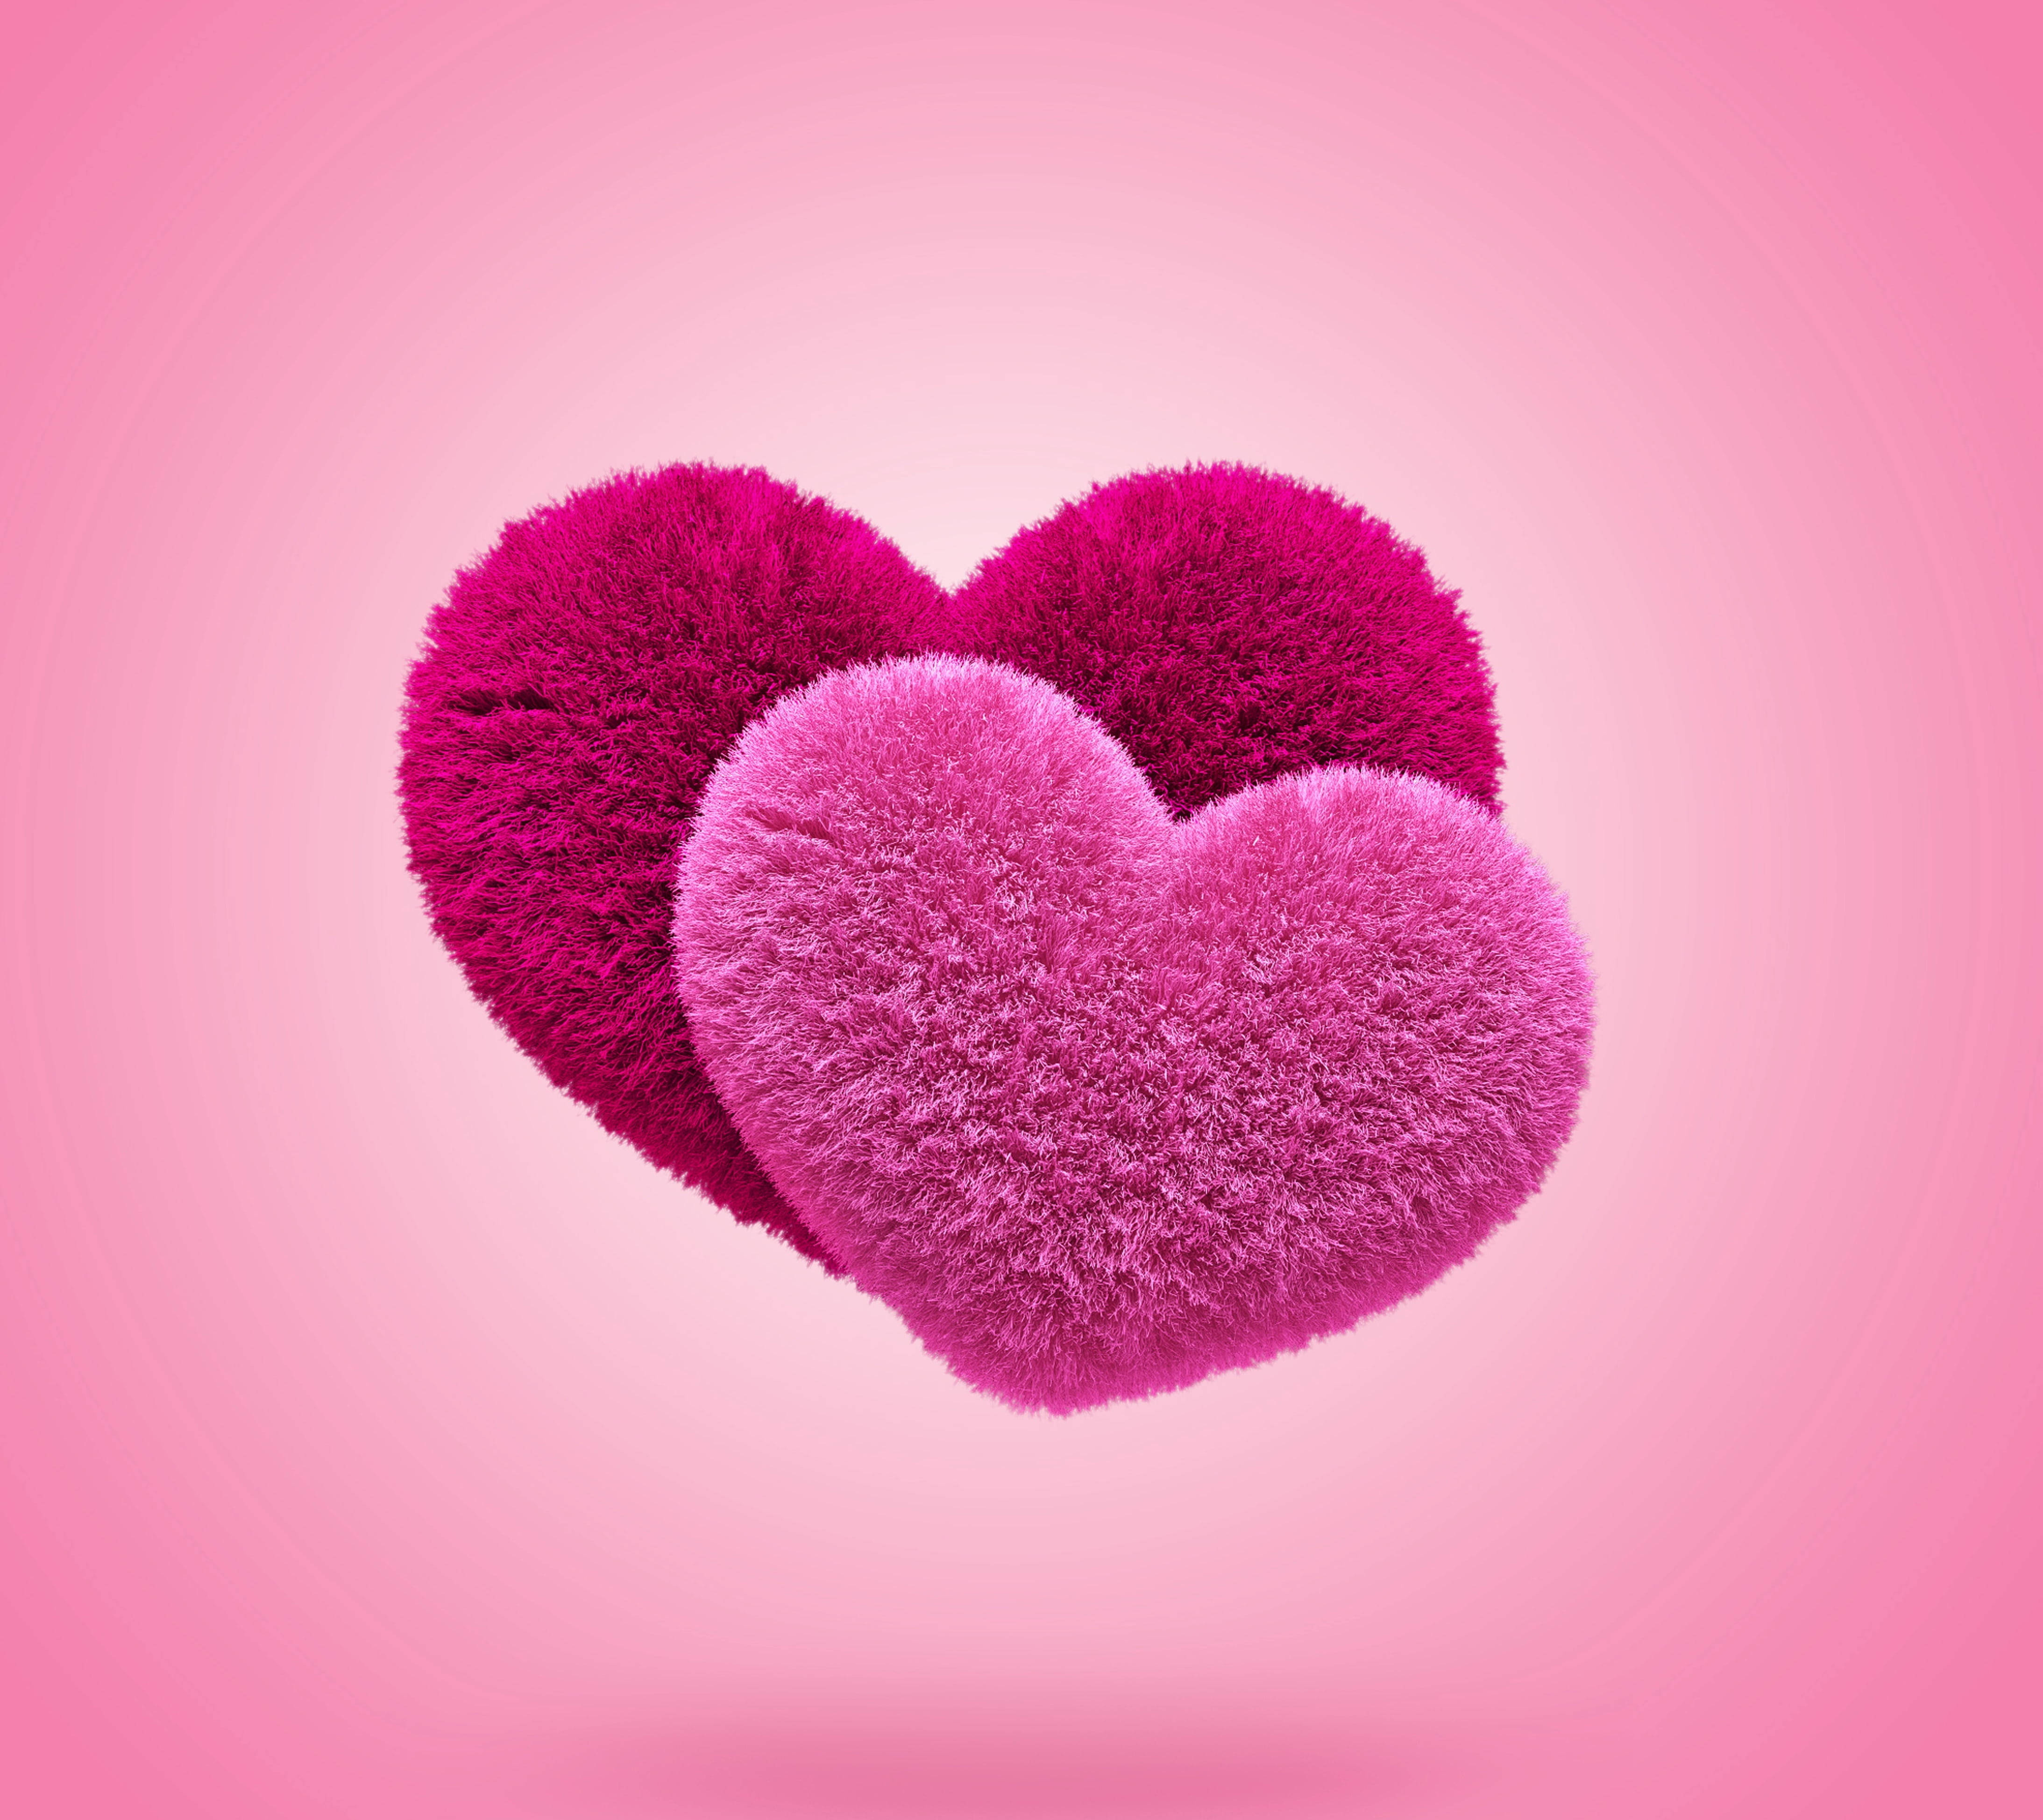 Caption: Spectacular 3d Rendered Pink Hearts On An Android Phone Screen - Love In Technology Wallpaper